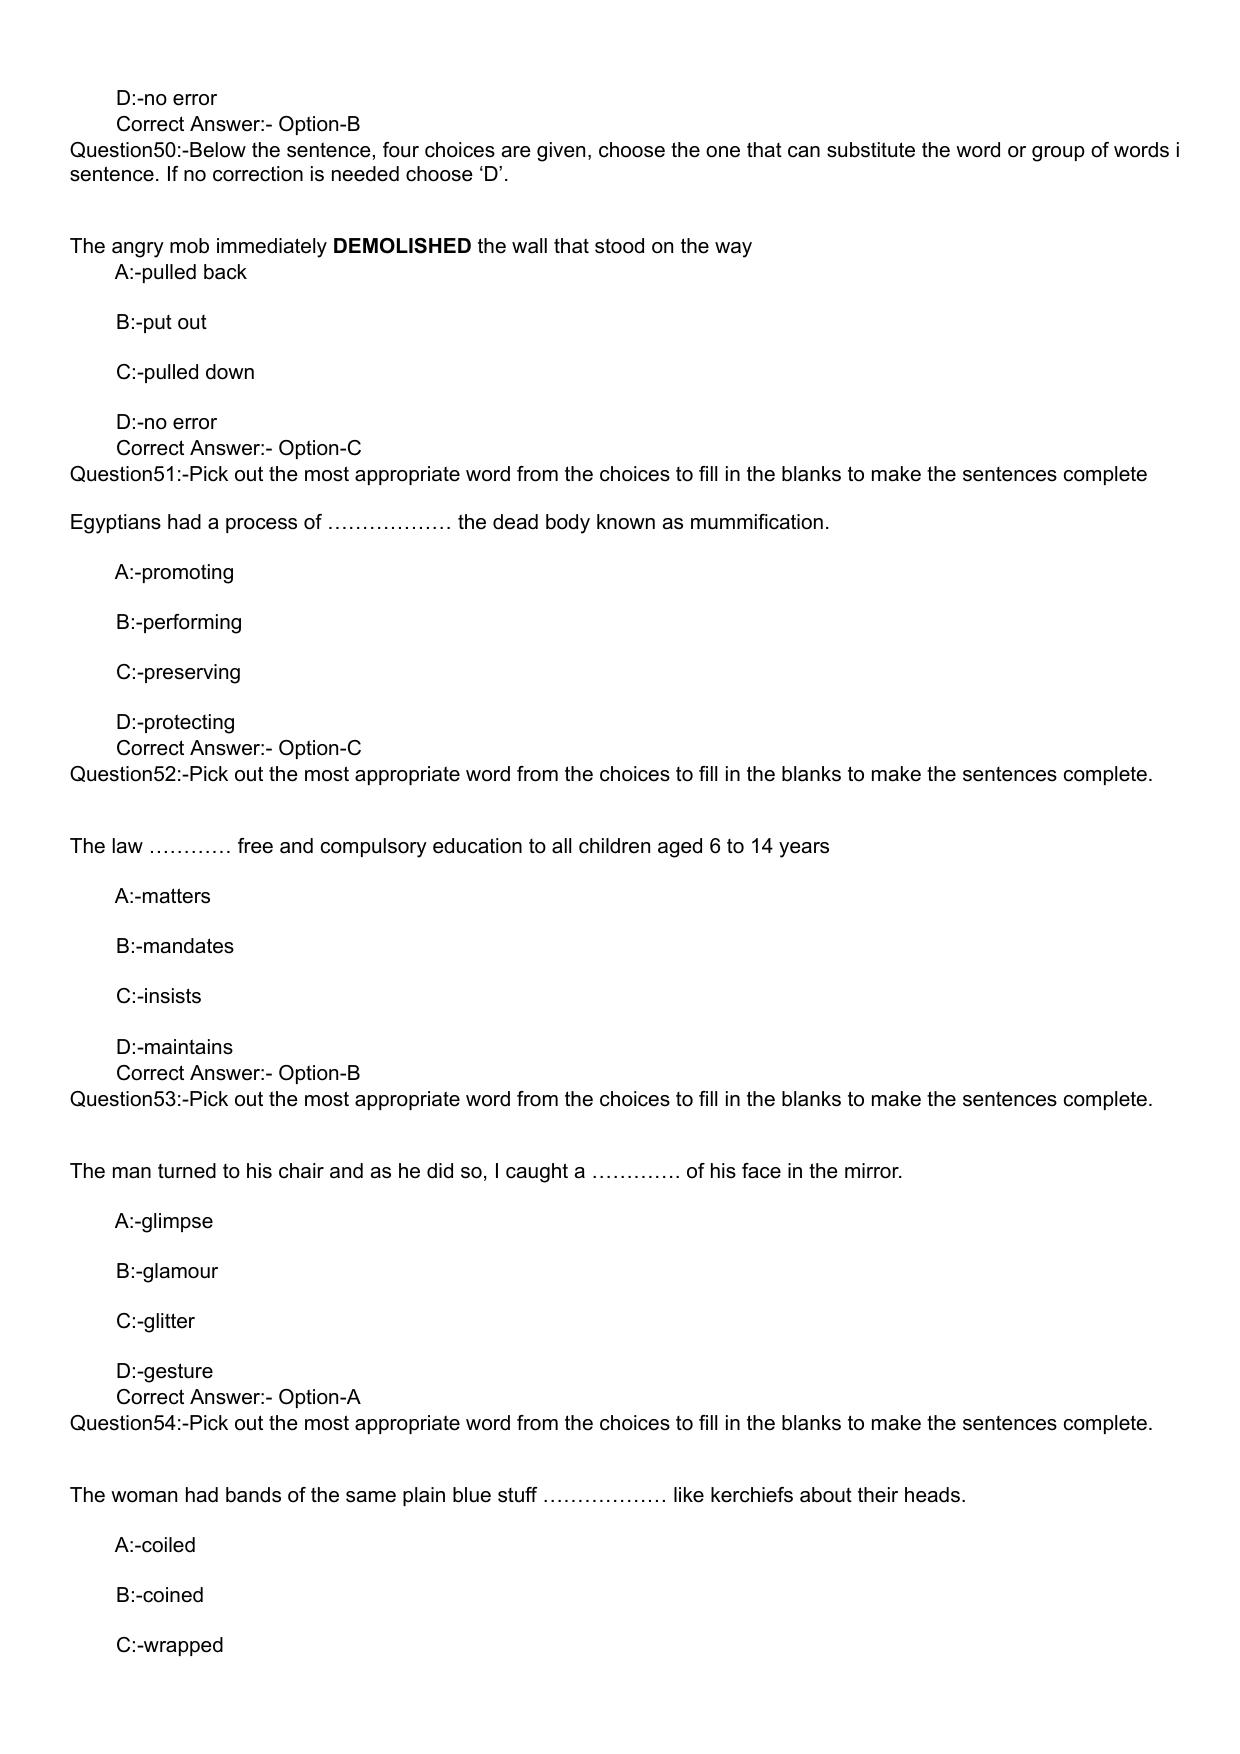 KLEE 5 Year LLB Exam 2020 Question Paper - Page 10